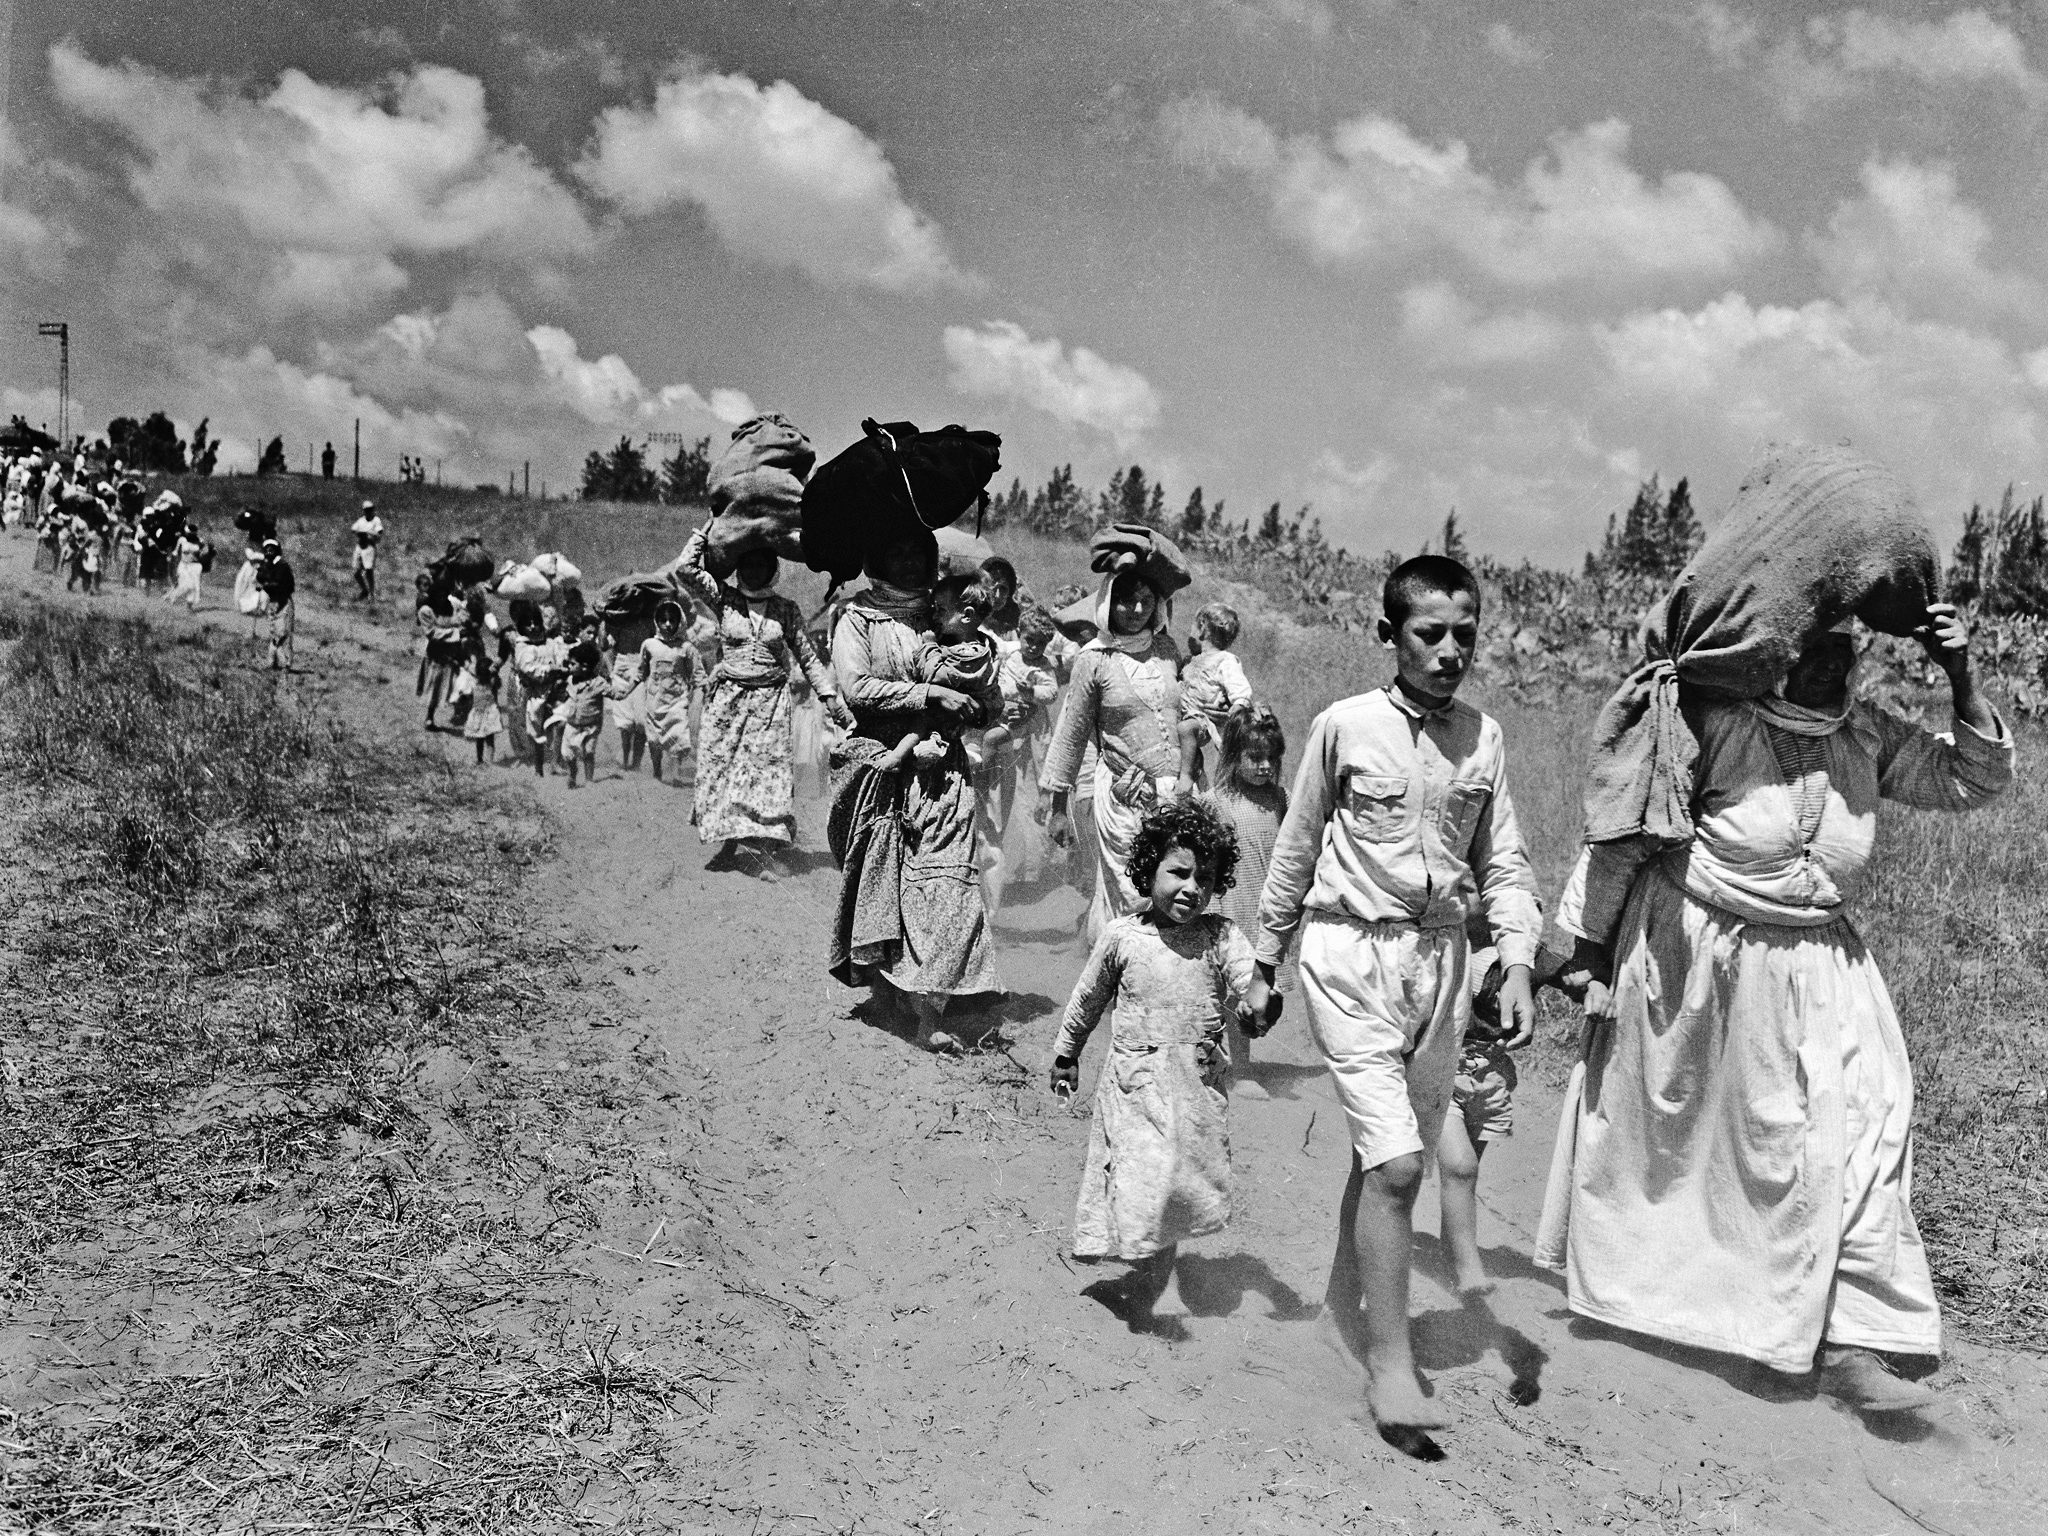 Palestinians driven from their homes in May 15, 1948, a day known as the Nakba catastrophe. File photo